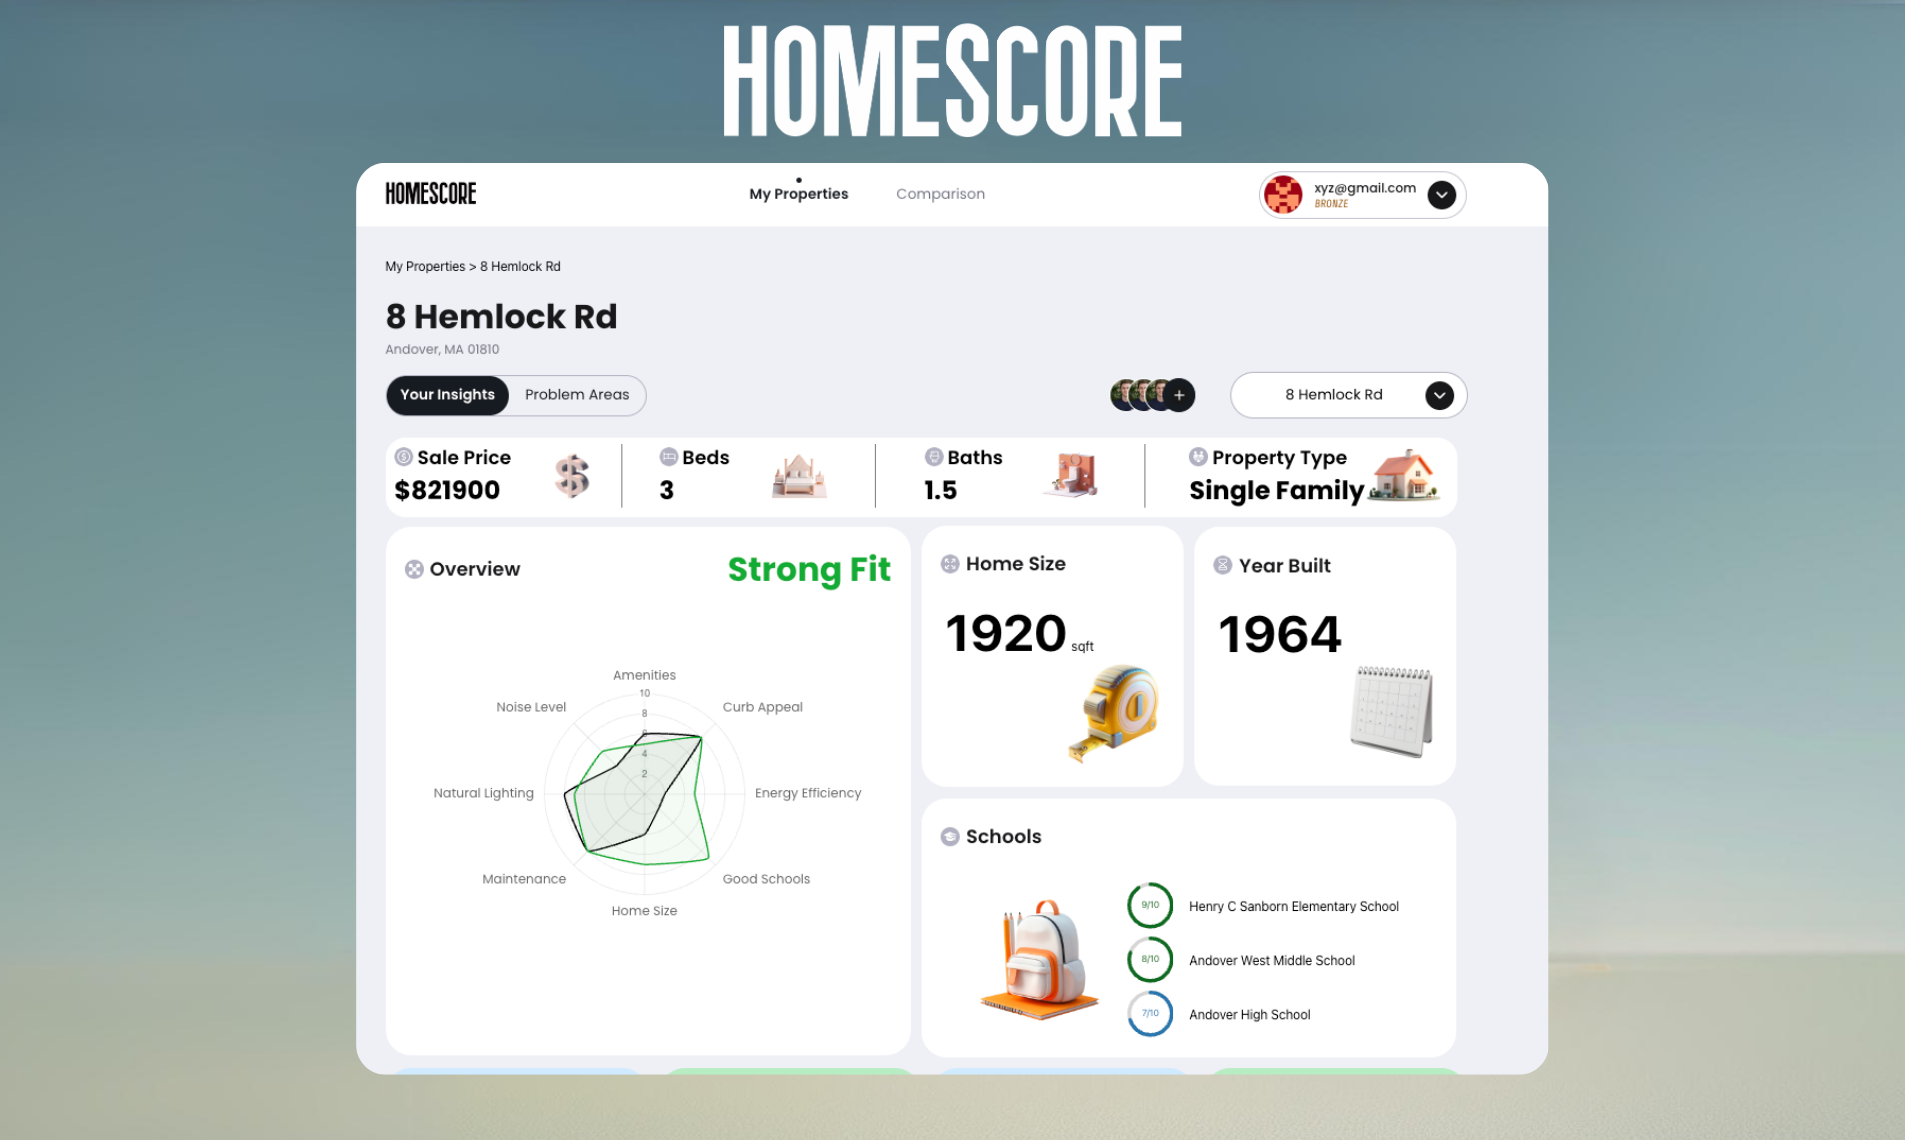 homescore - CarFax for your future home